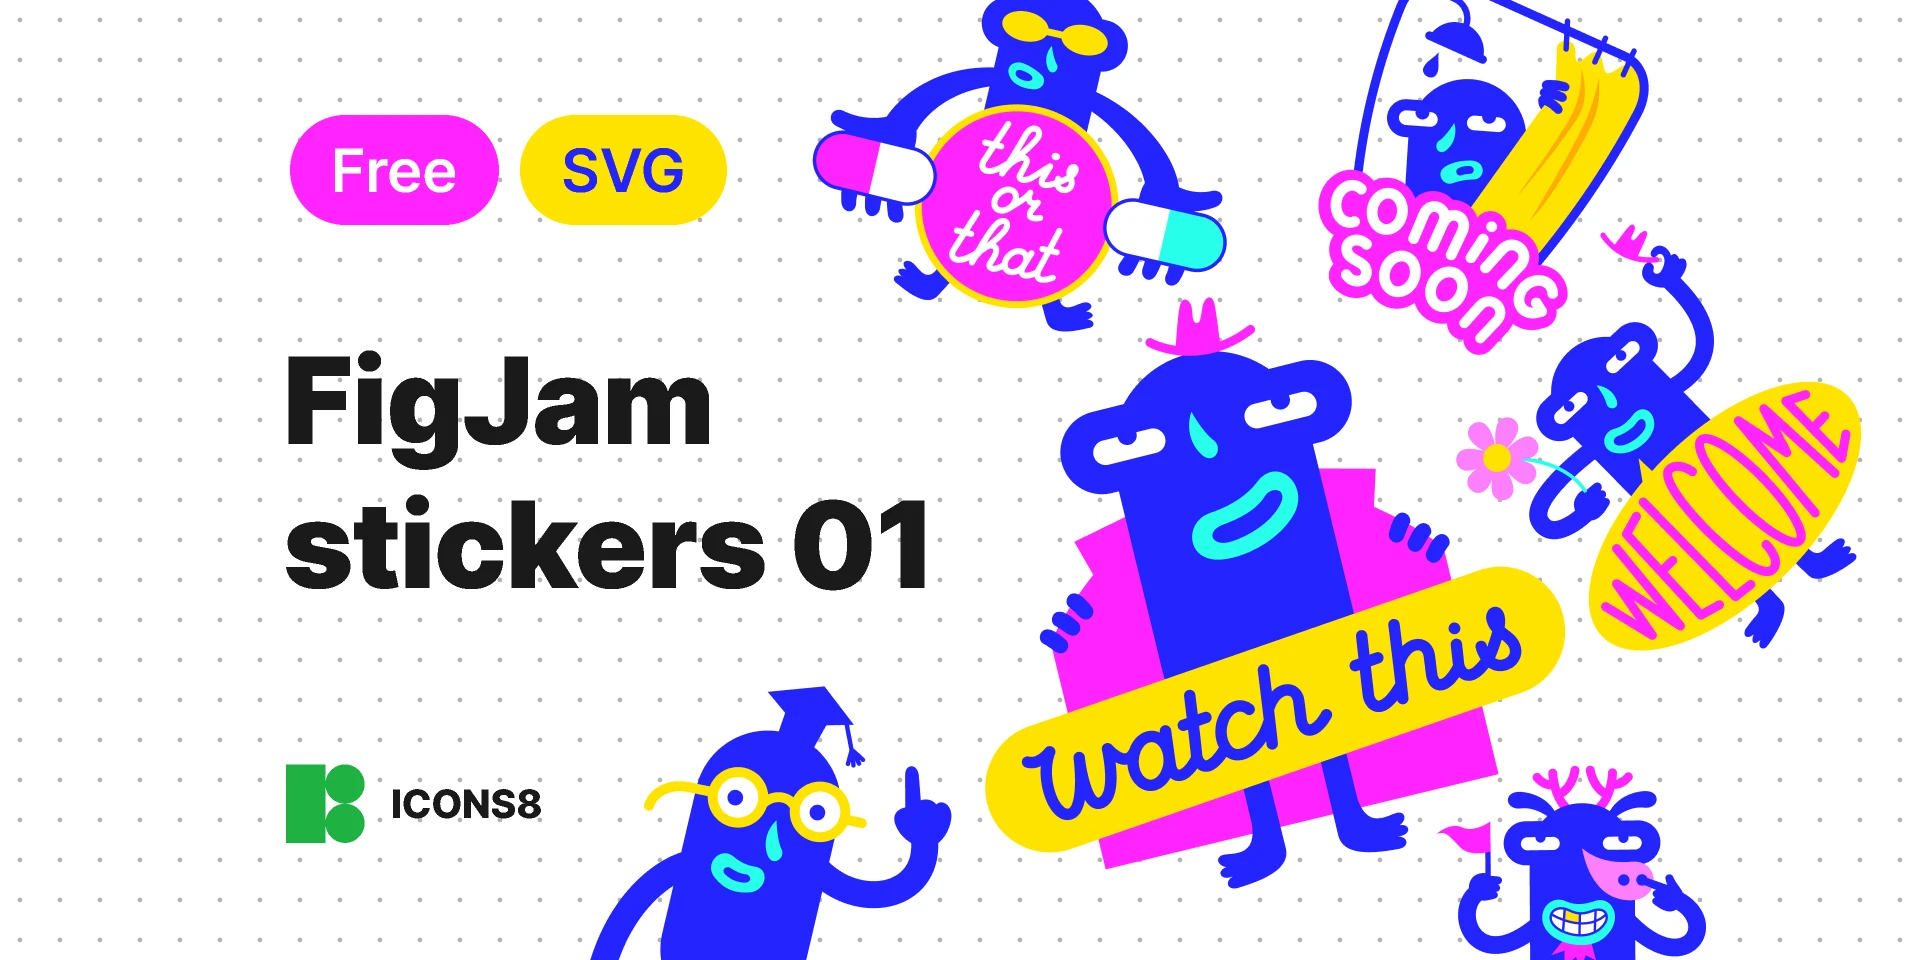 FigJam stickers in SVG for Figma and Adobe XD